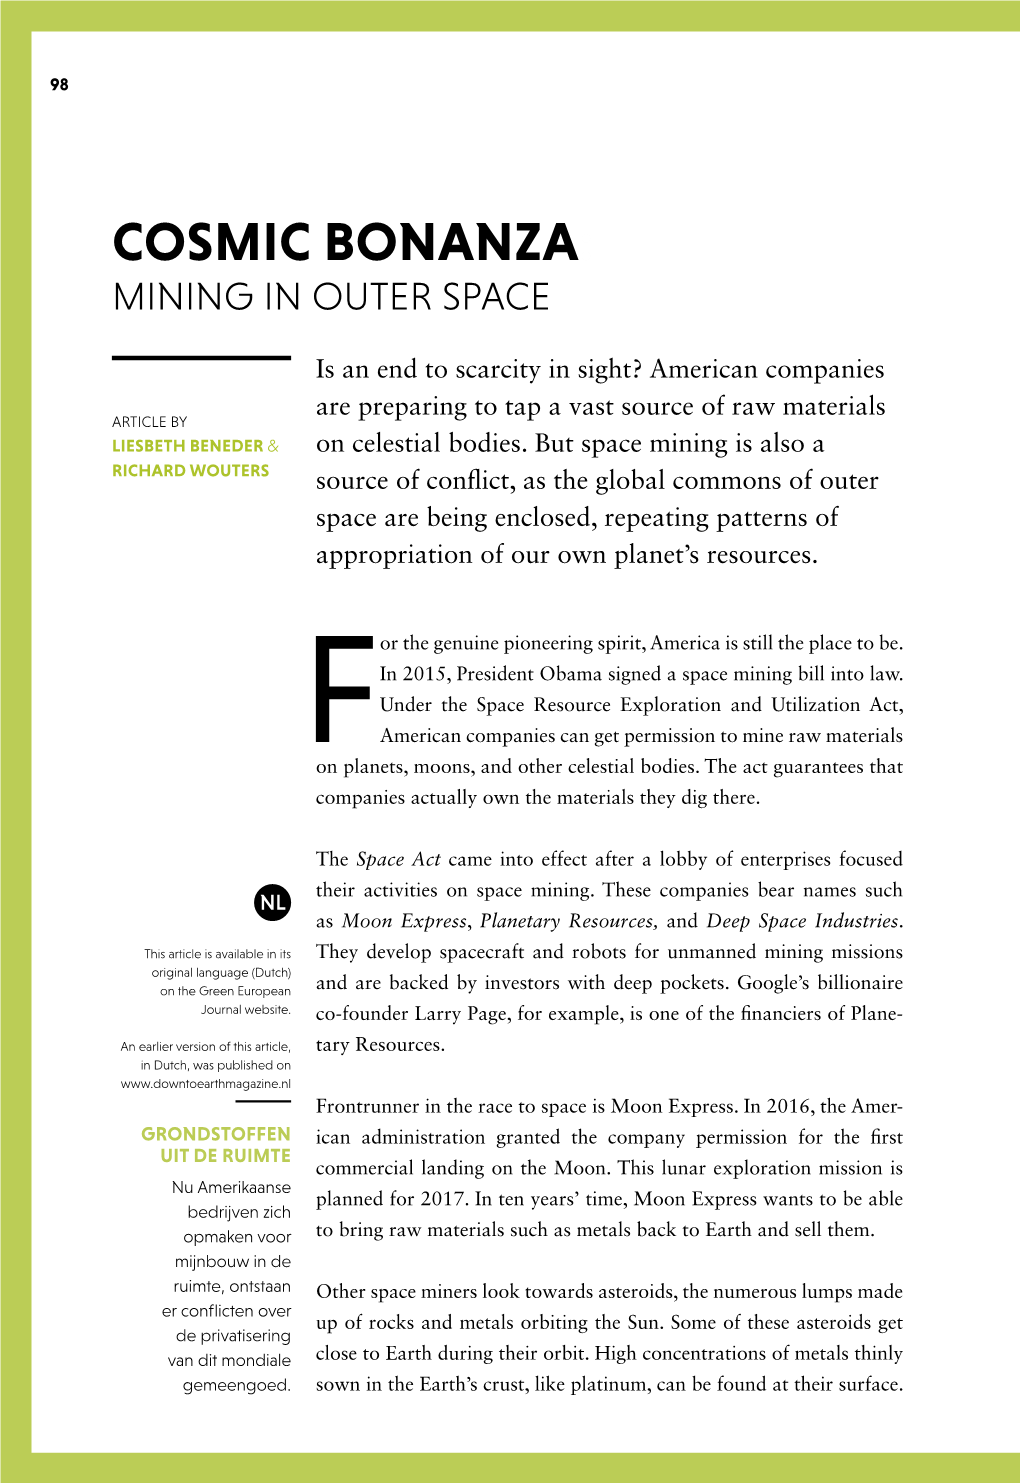 Cosmic Bonanza: Mining in Outer Space